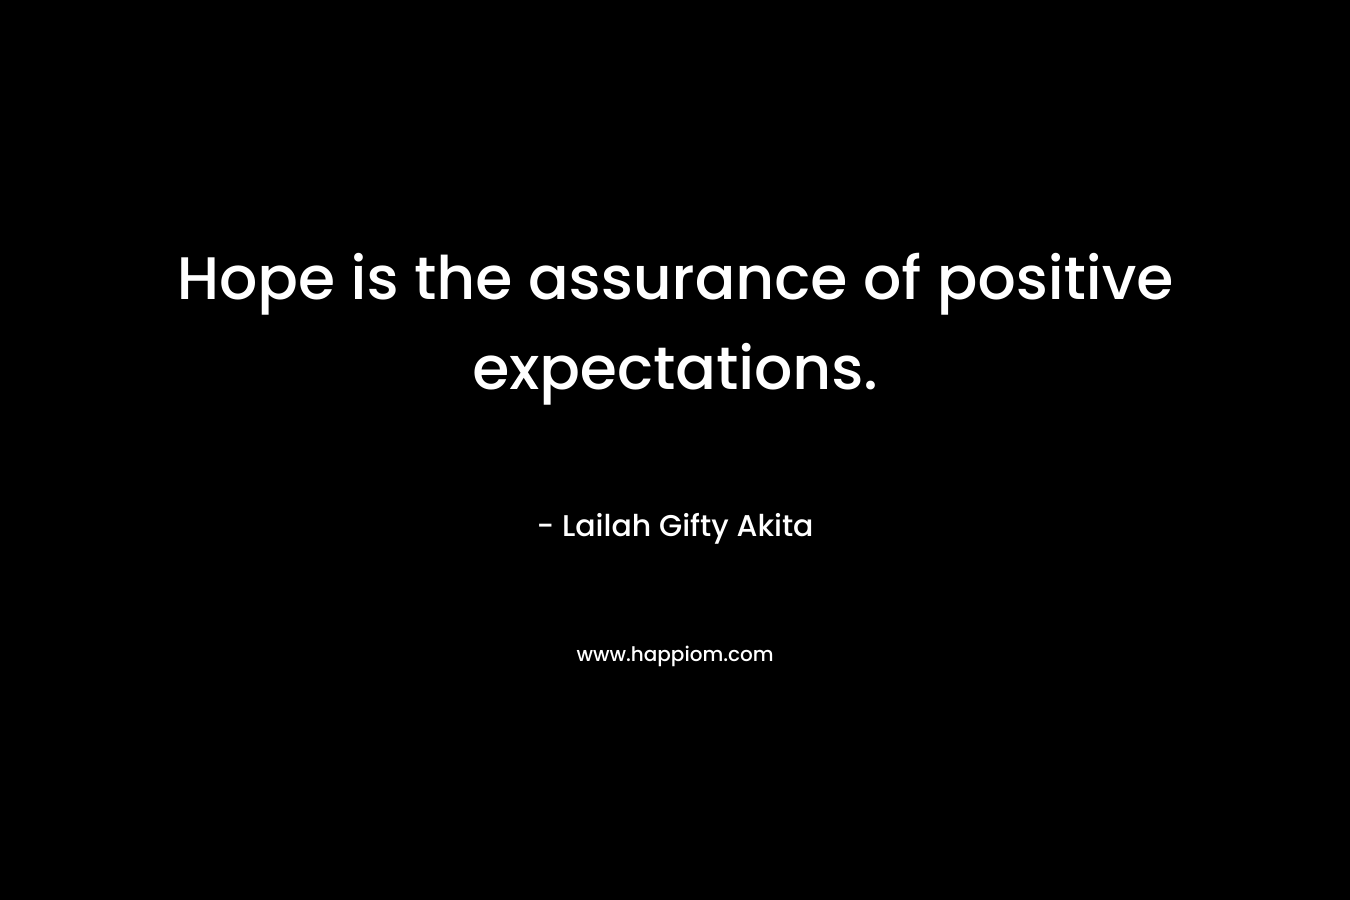 Hope is the assurance of positive expectations.